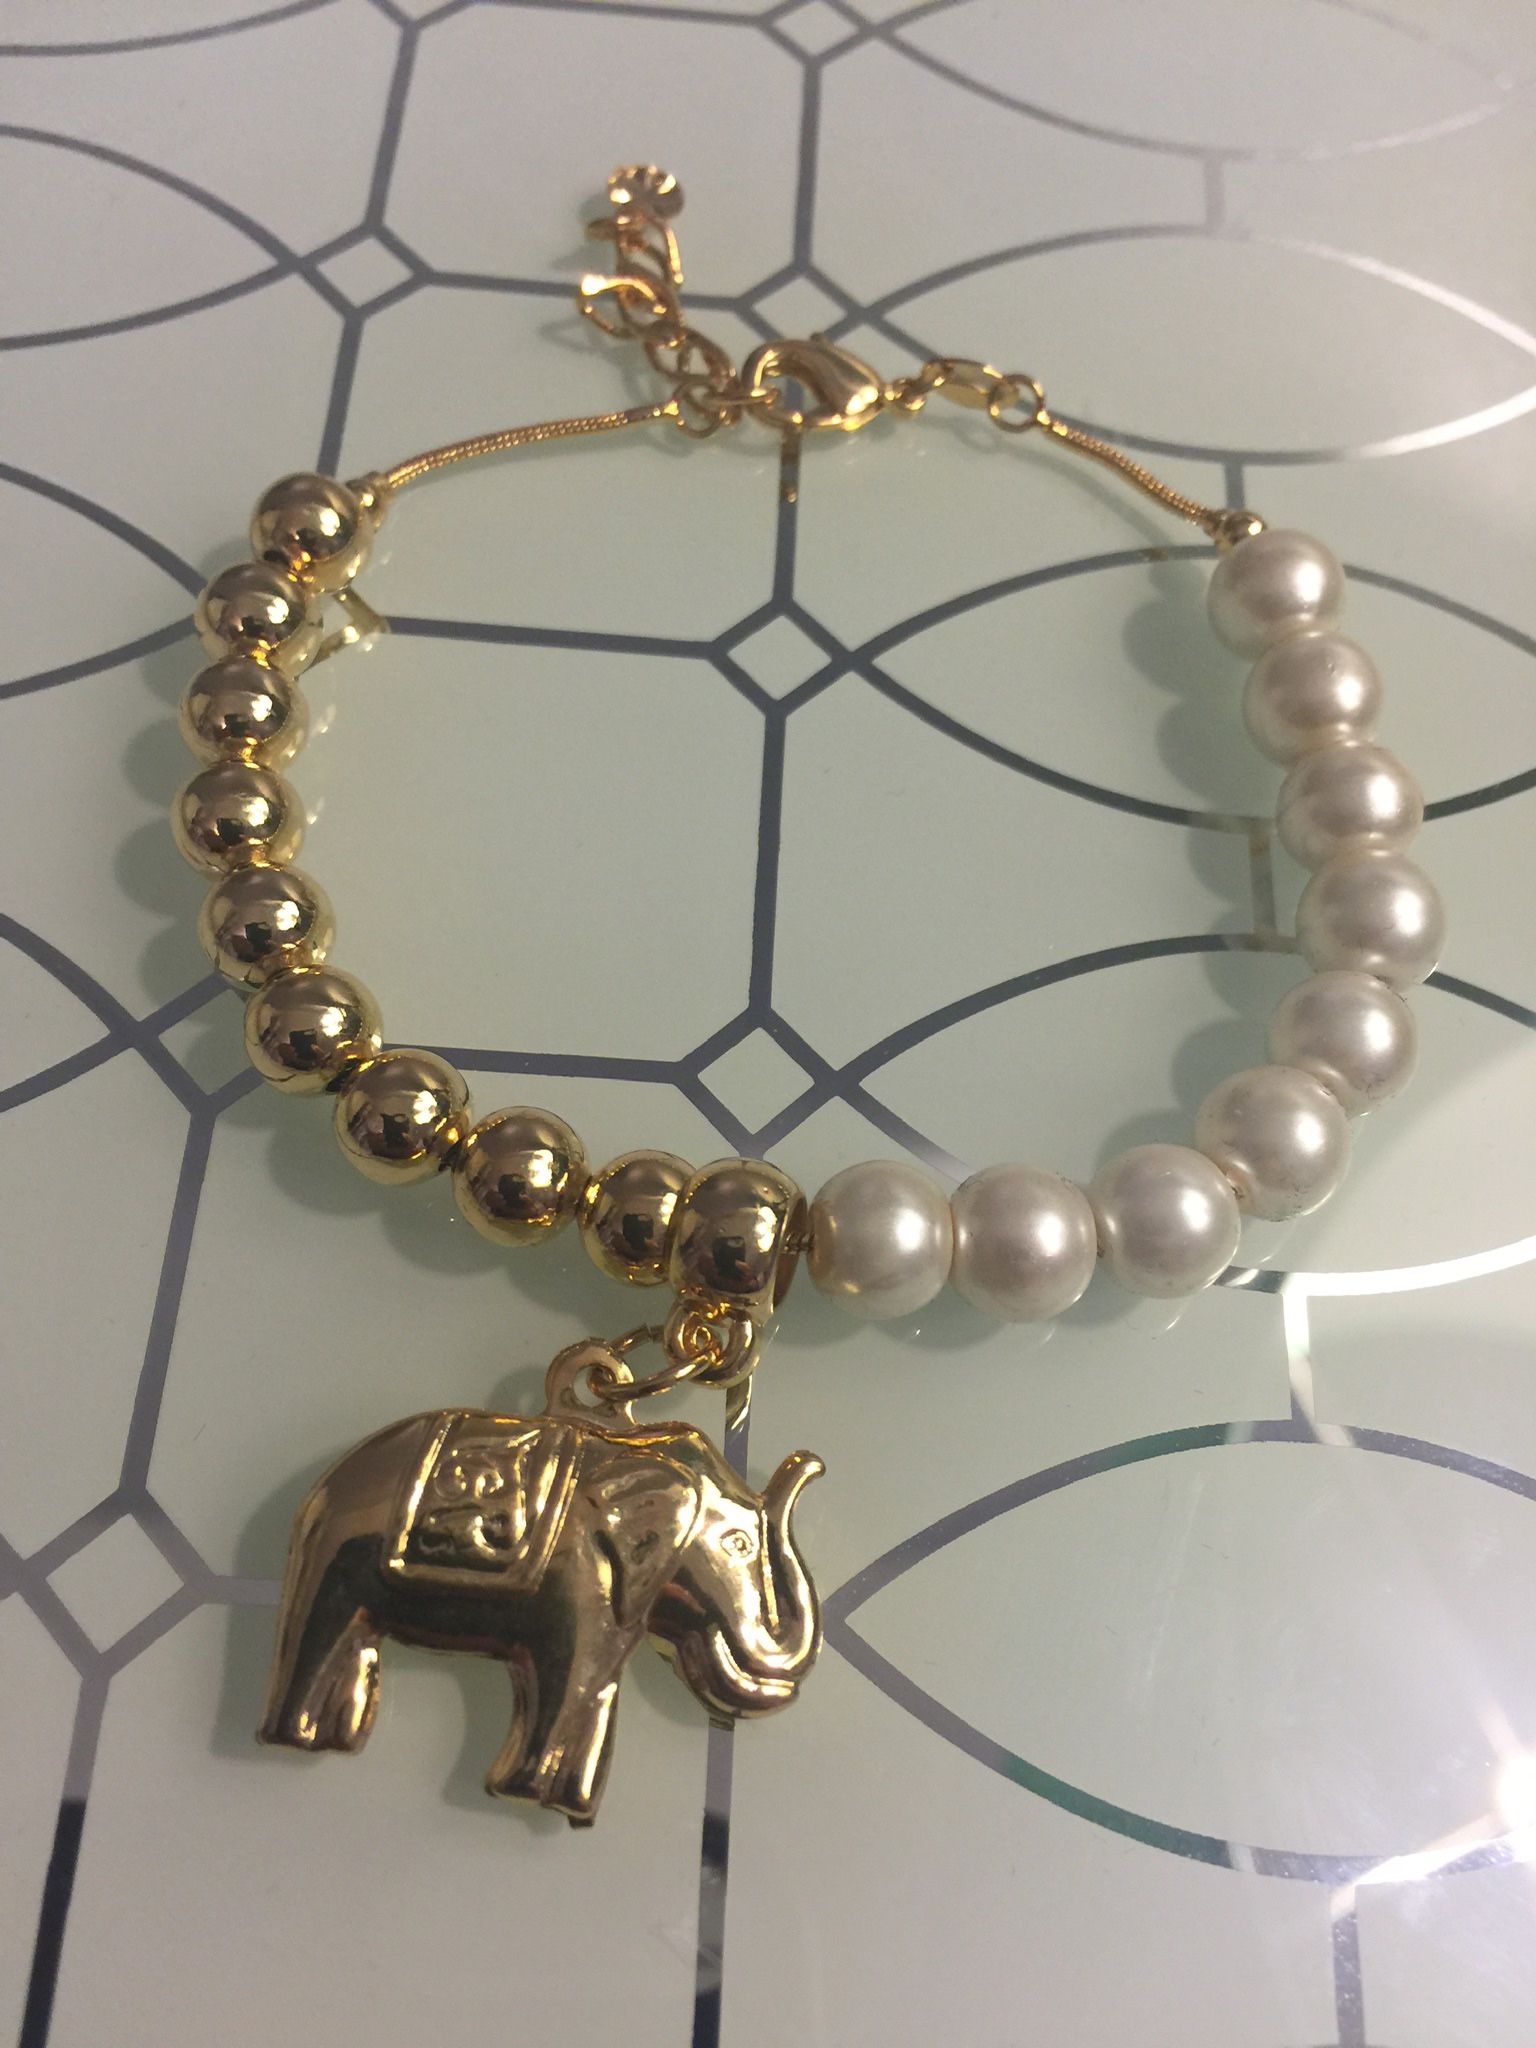 Bracelet With Elephant Charm And Pearls 